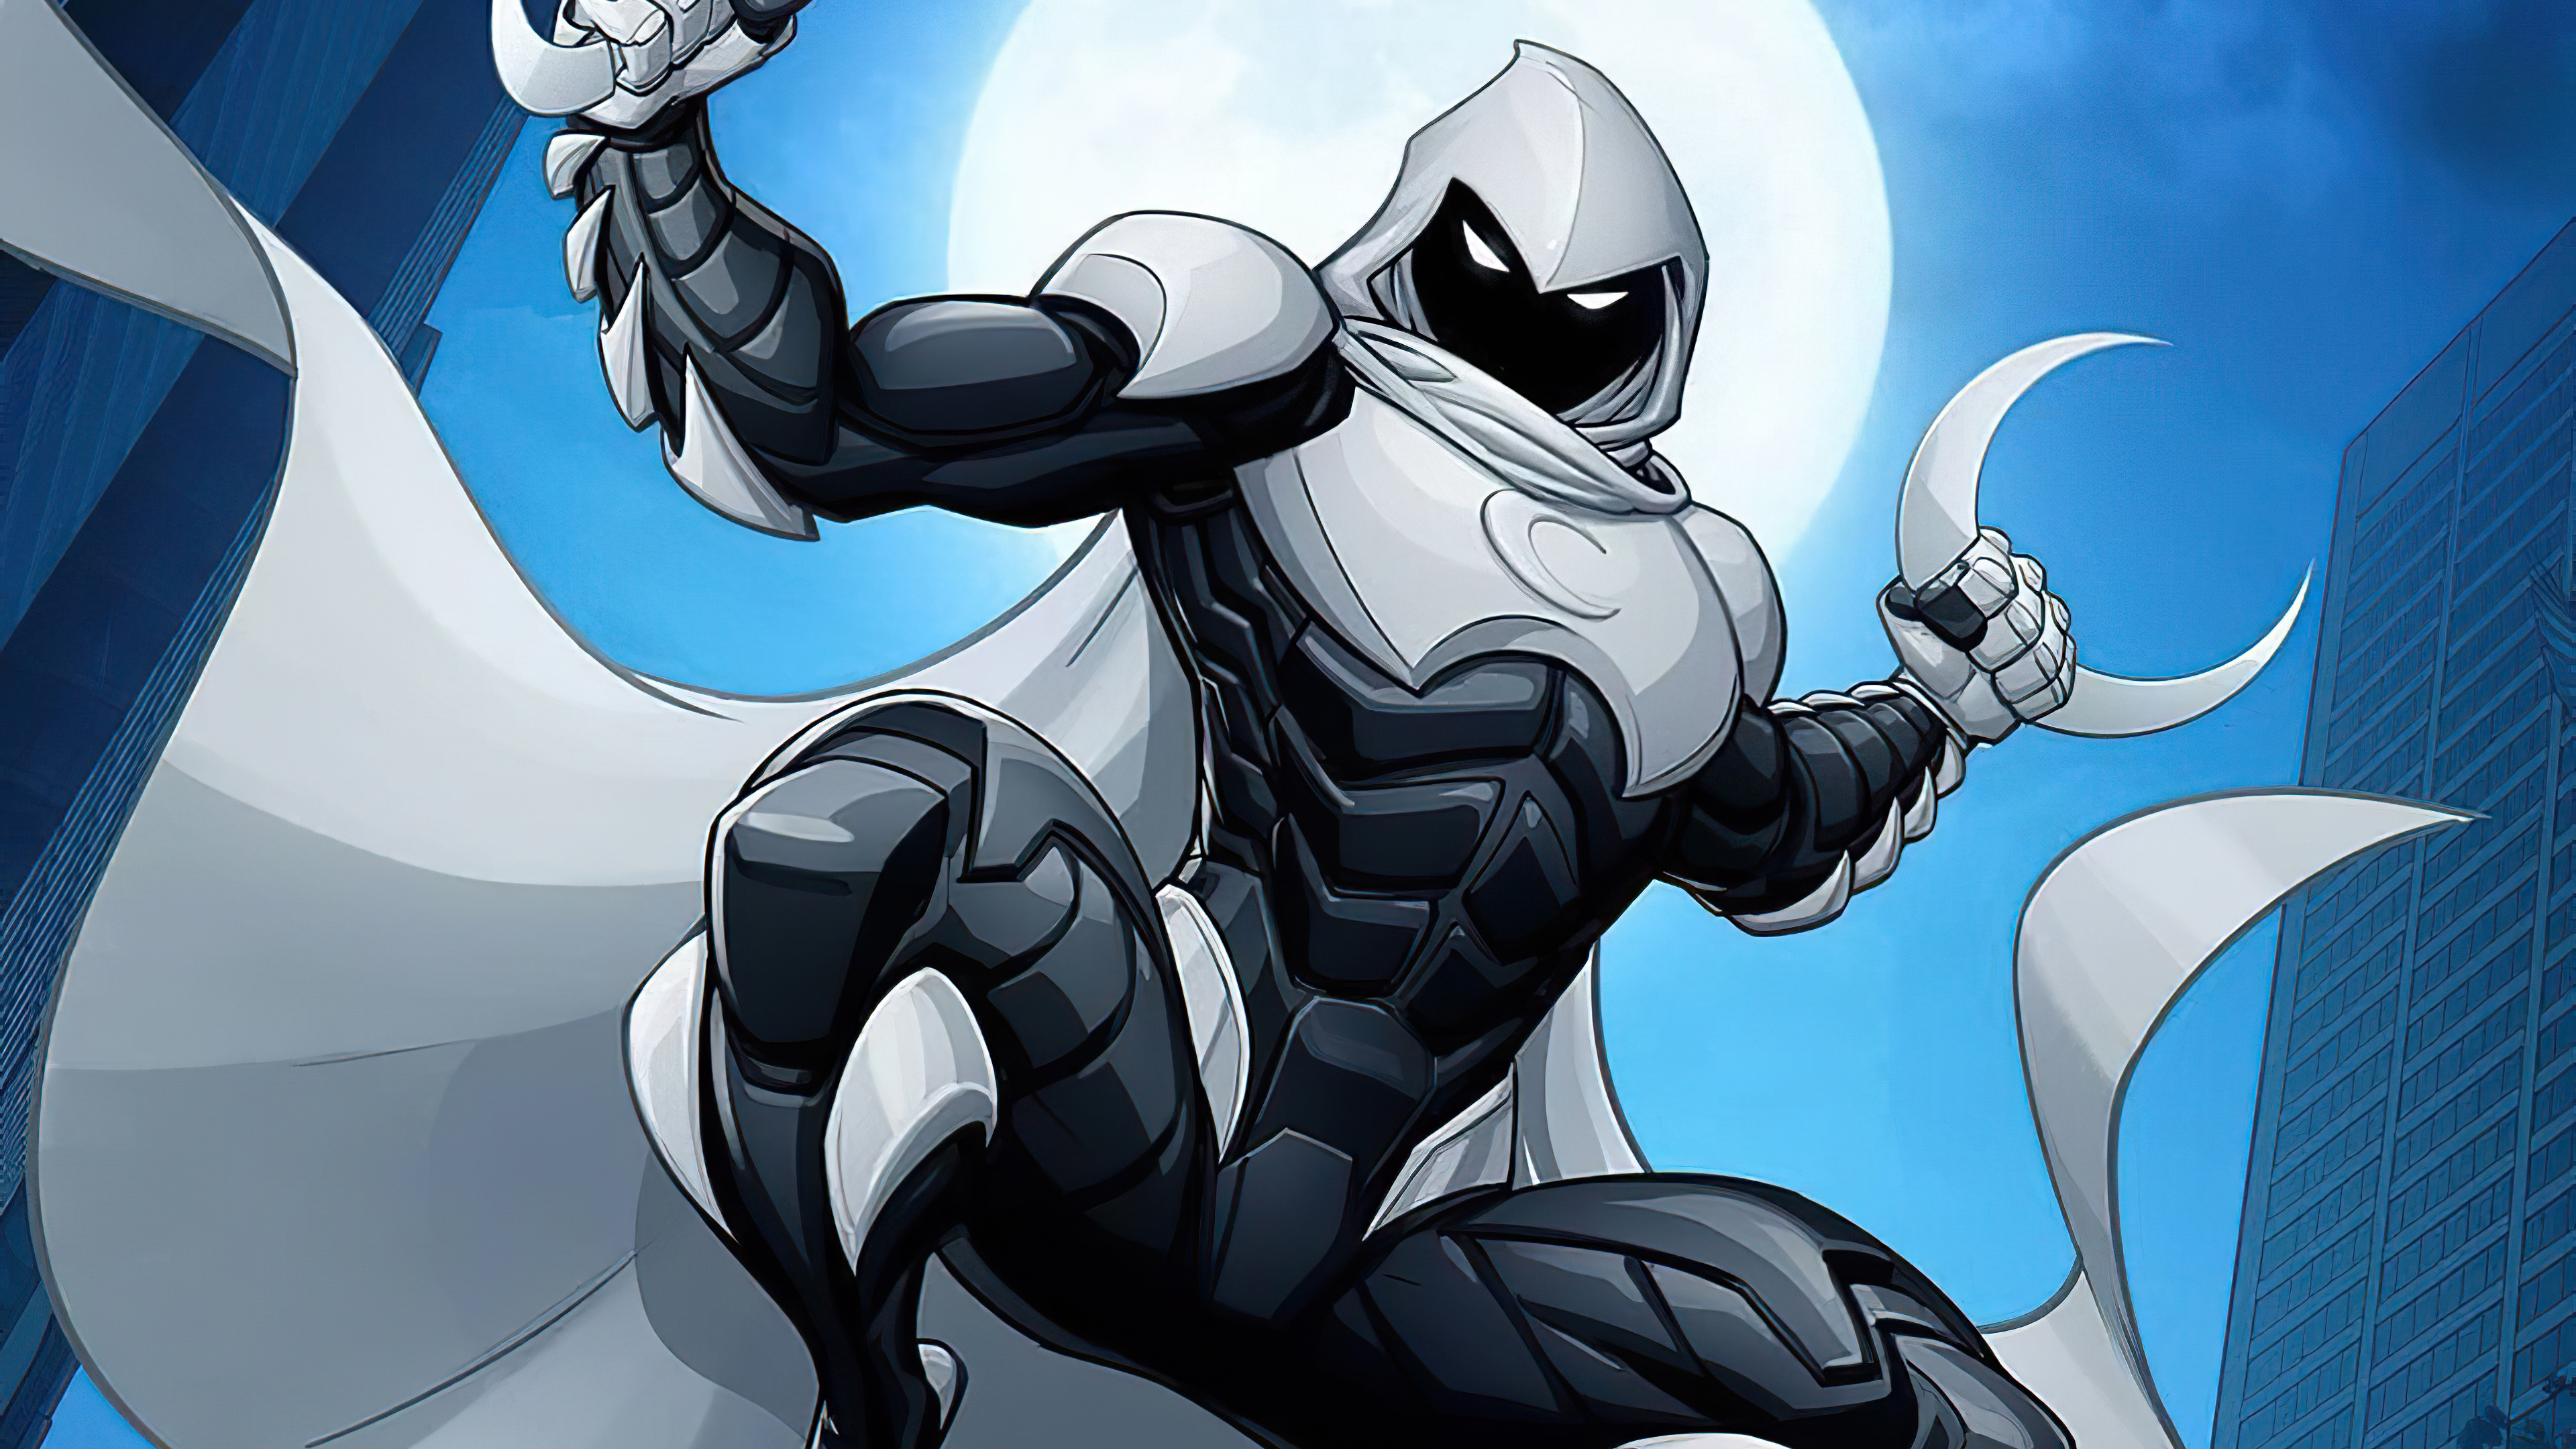 Moon Knight Artwork HD Superheroes 4k Wallpapers Images Backgrounds 